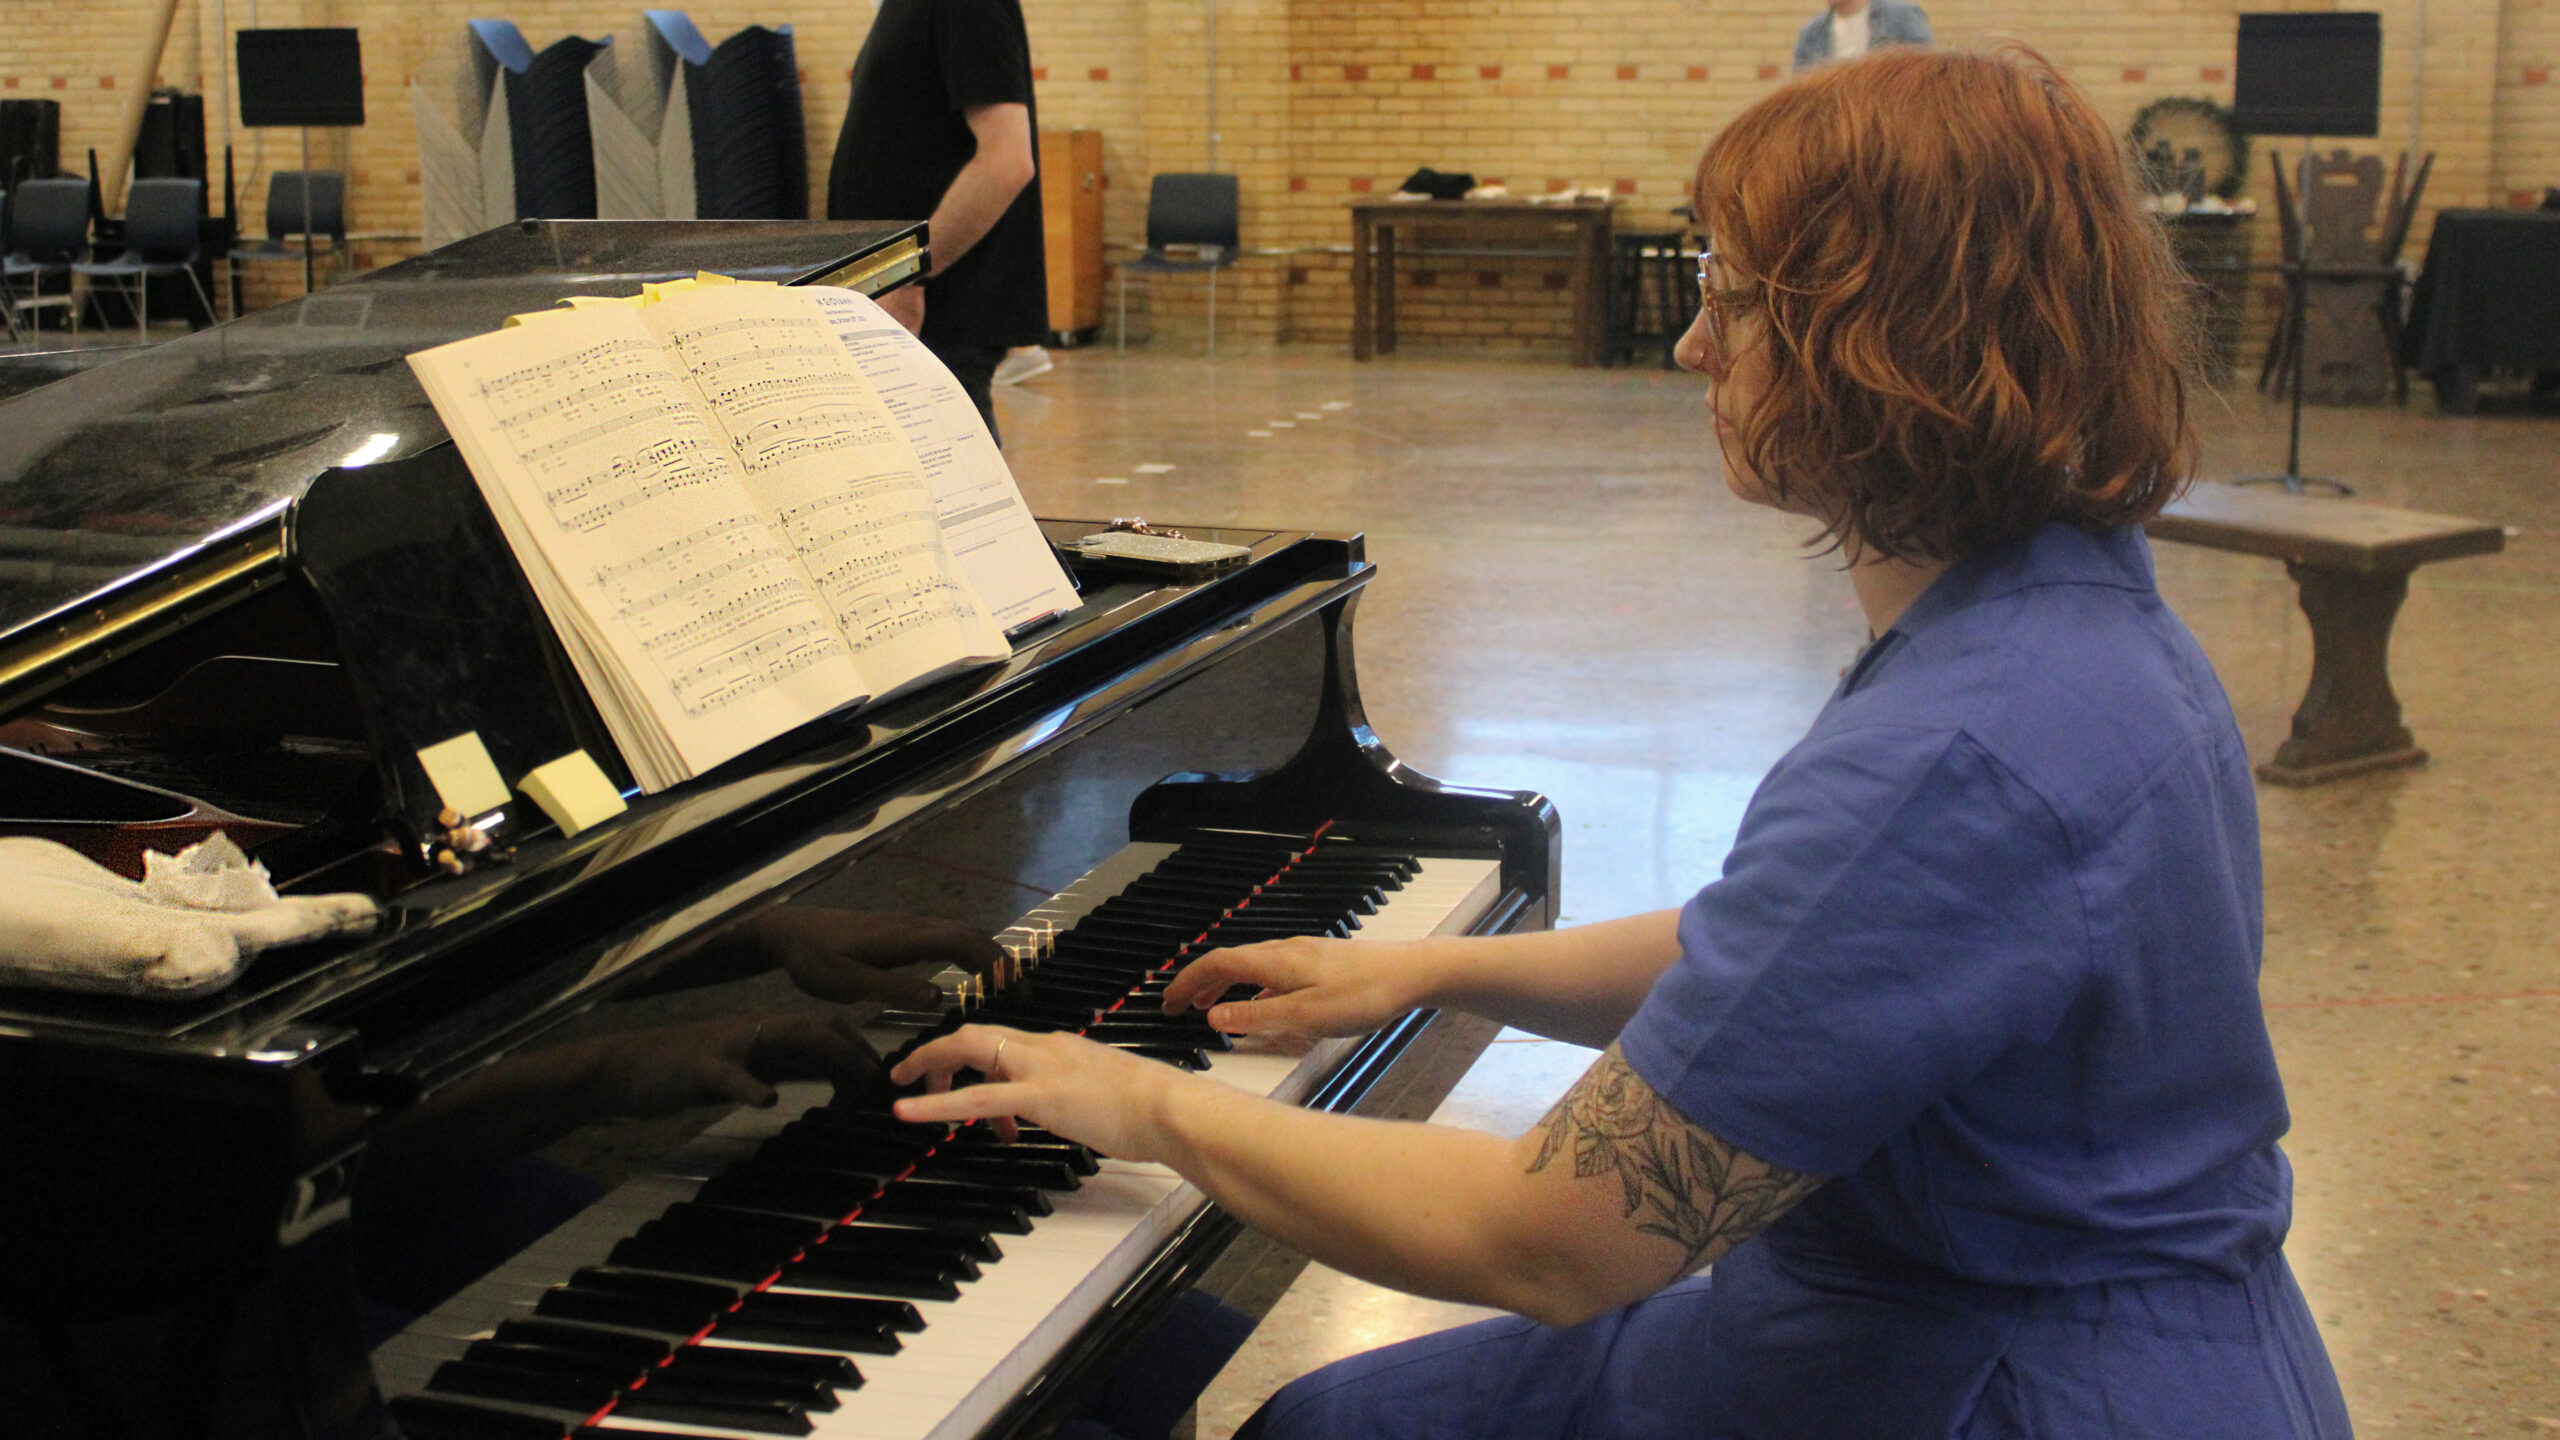 A woman in blue plays the piano in a rehearsal hall